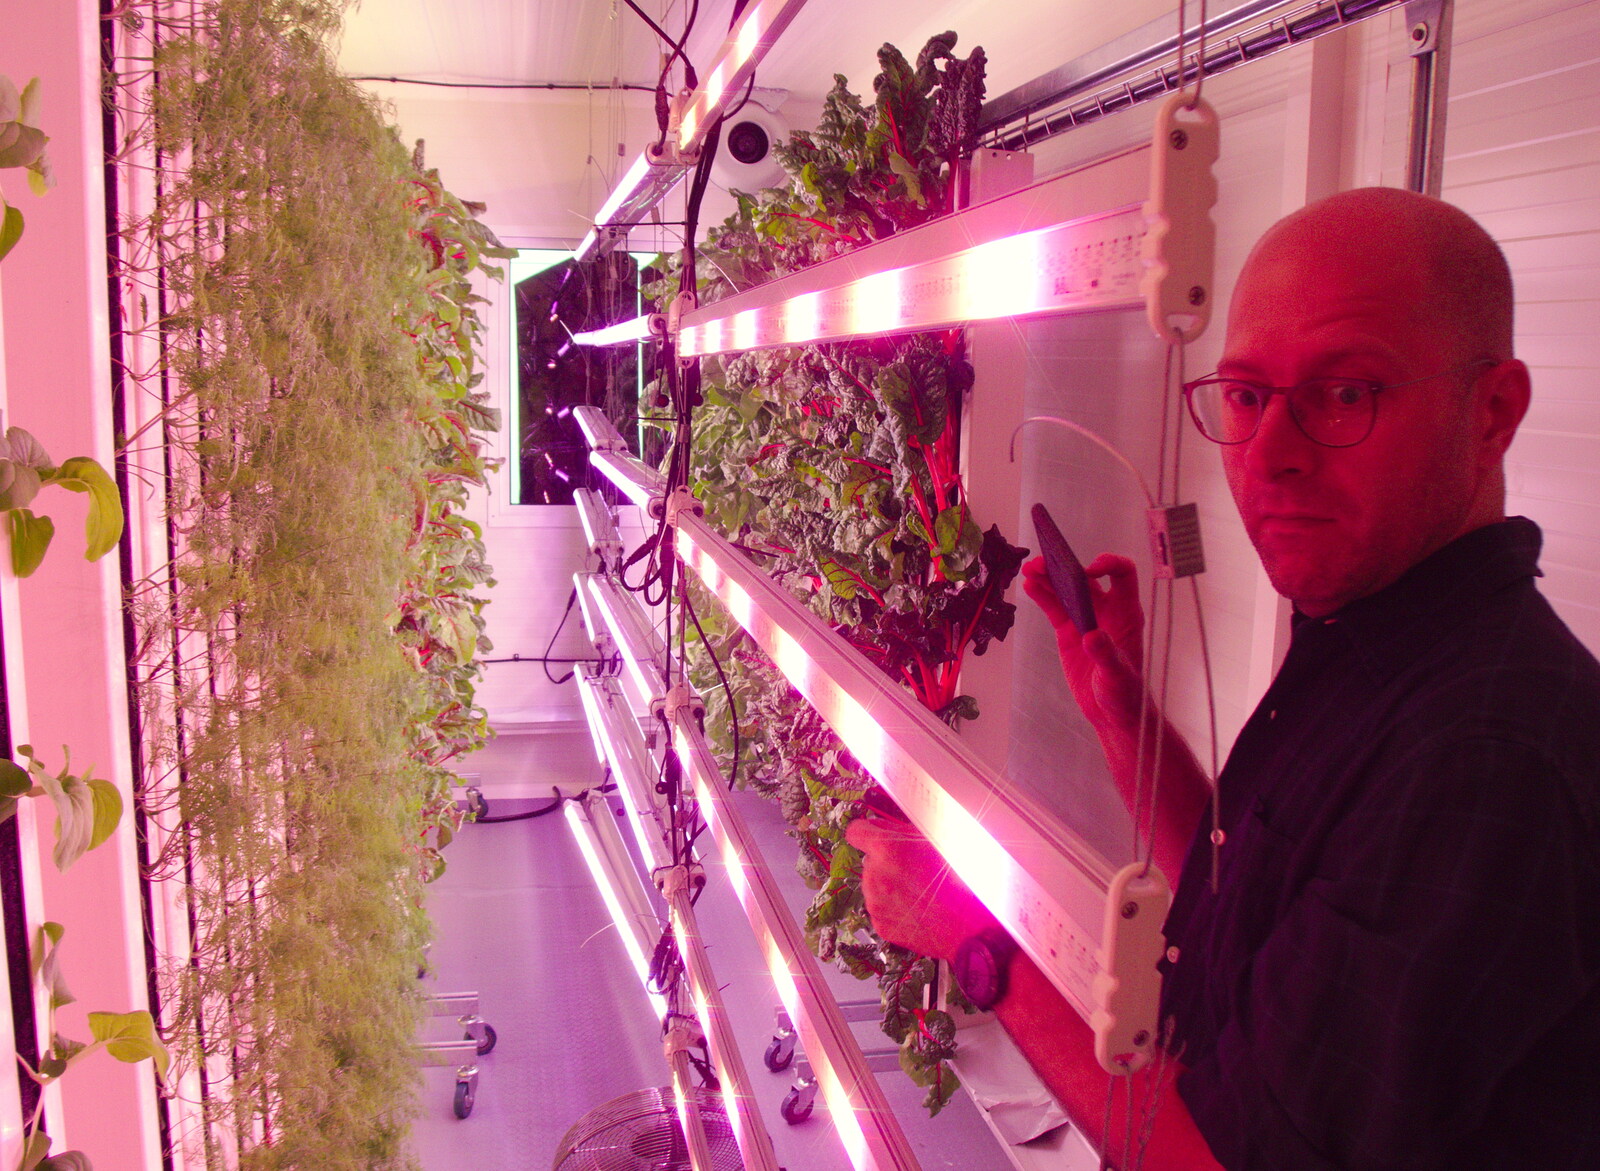 Adrian roams around in the purple light from Up on the Roof: a Hydroponic City Farm, Kingdom Street, Paddington - 3rd September 2019